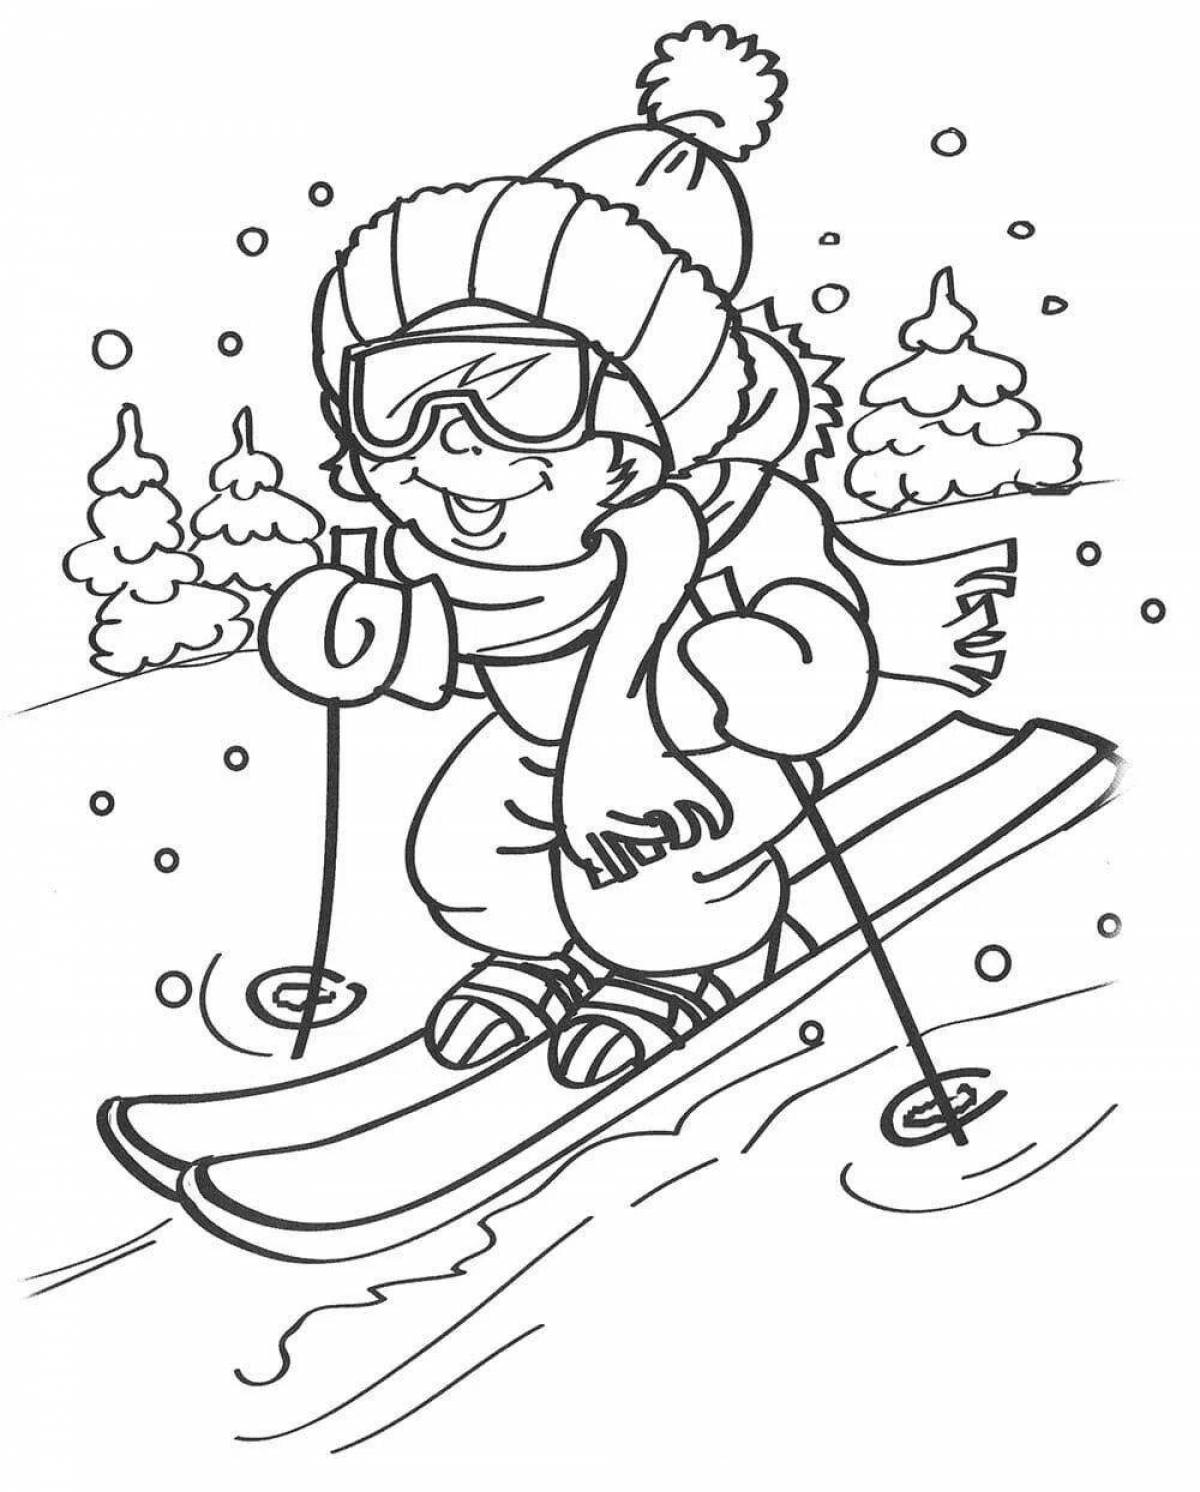 Fun skier coloring book for 5-6 year olds